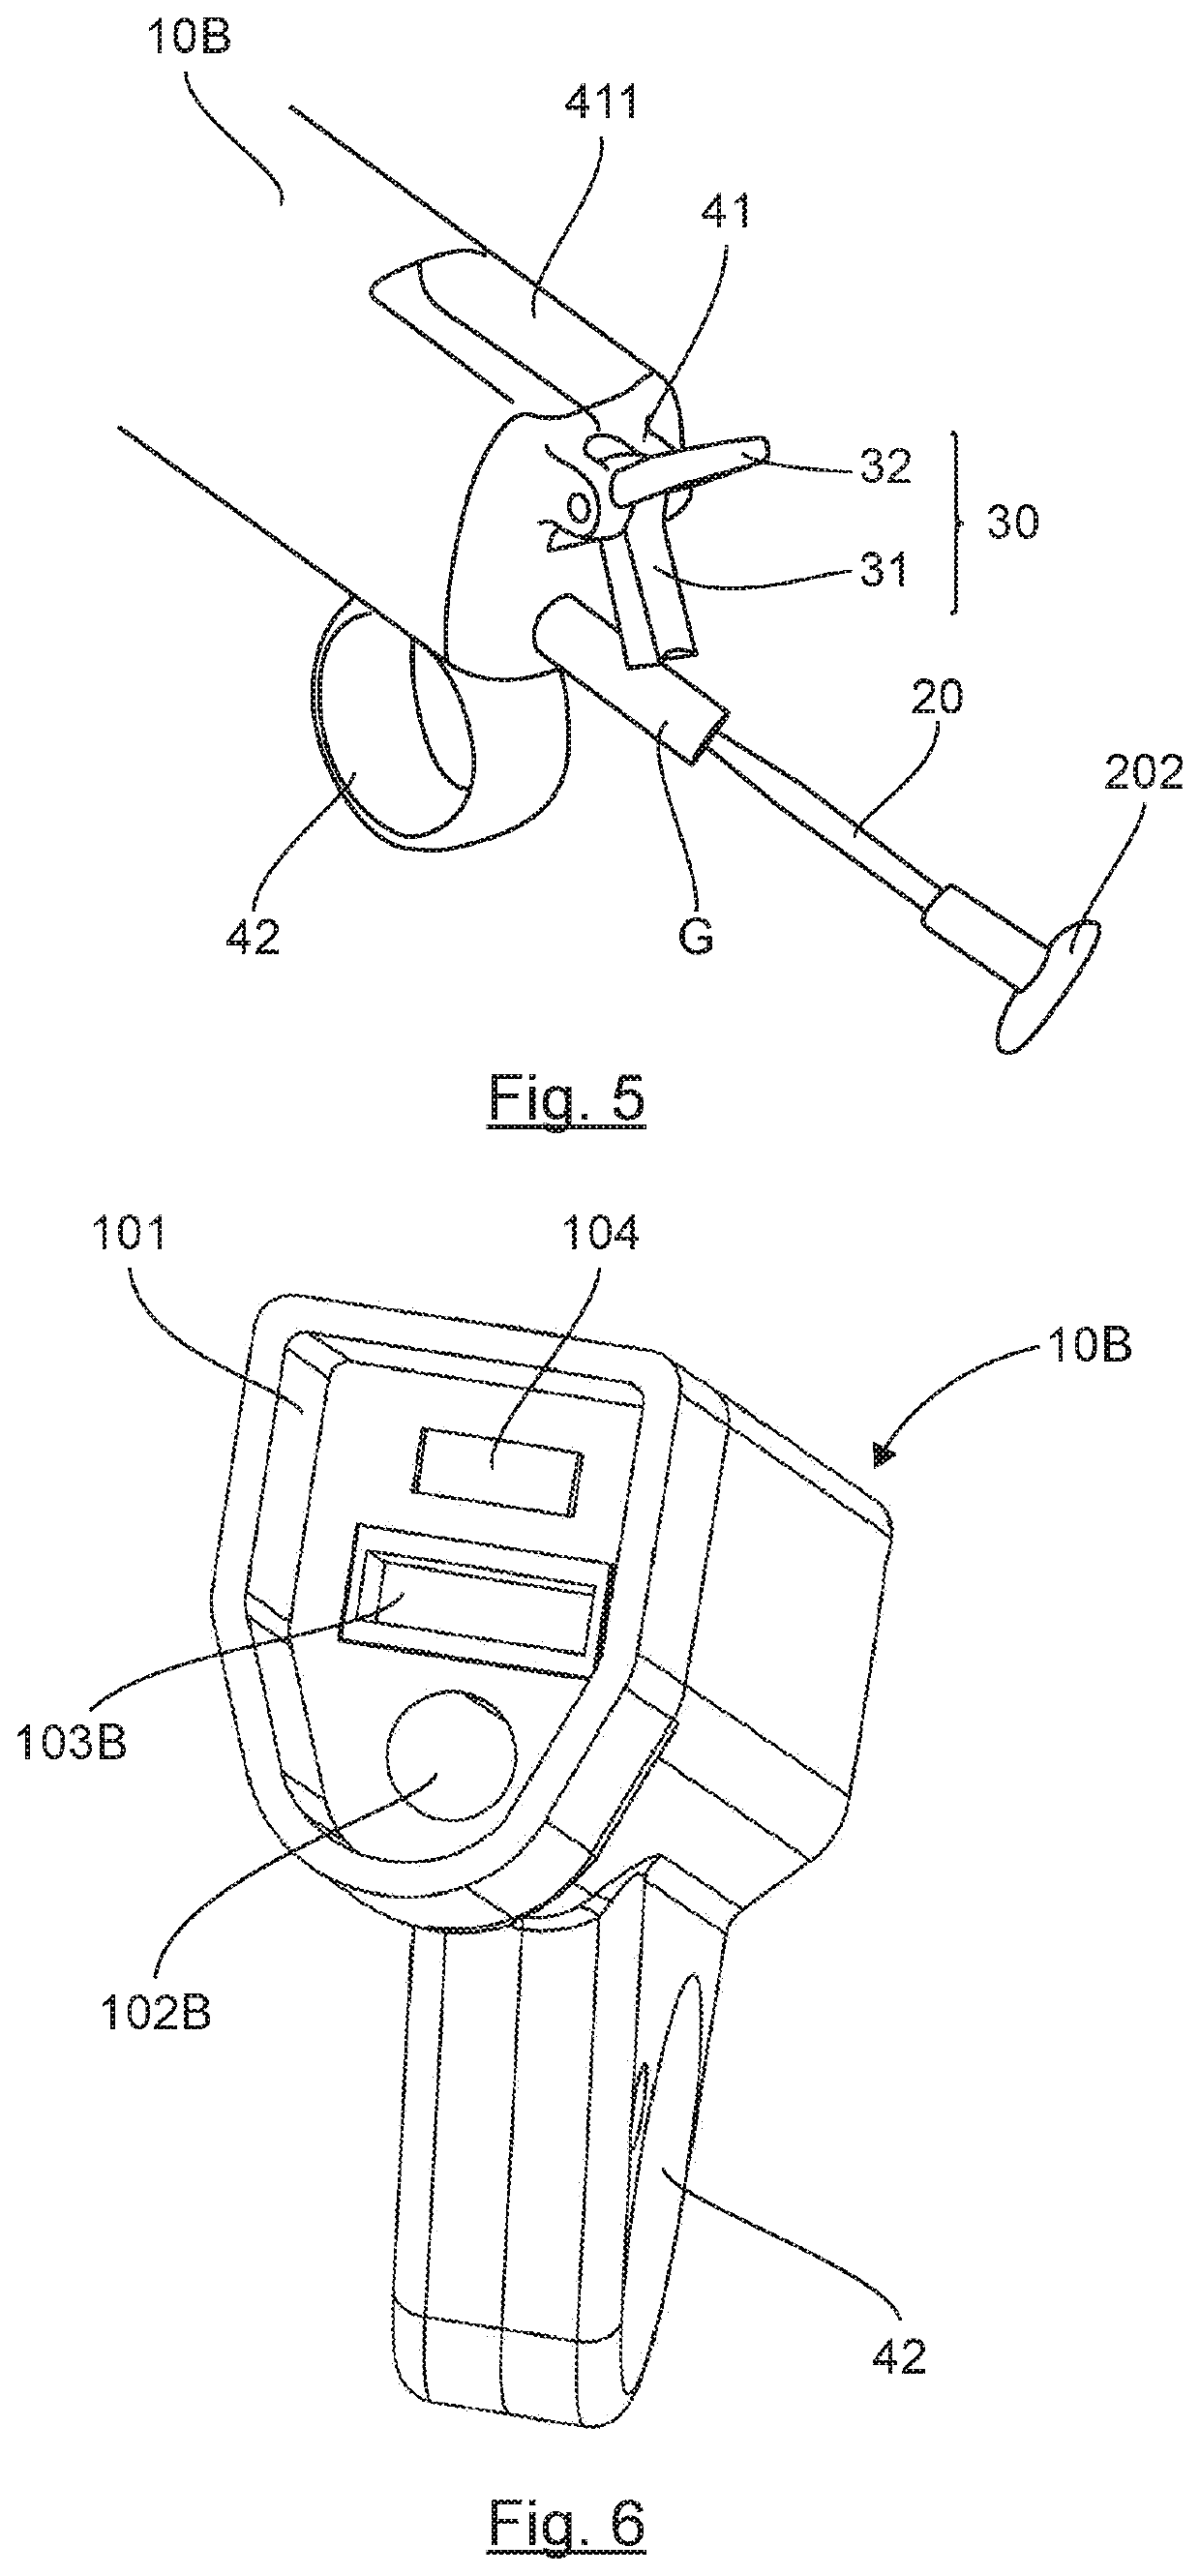 Device for artificial insemination, gynaecological examination of the vagina and the cervix, and to assist with uterine treatments and sample collection in livestock